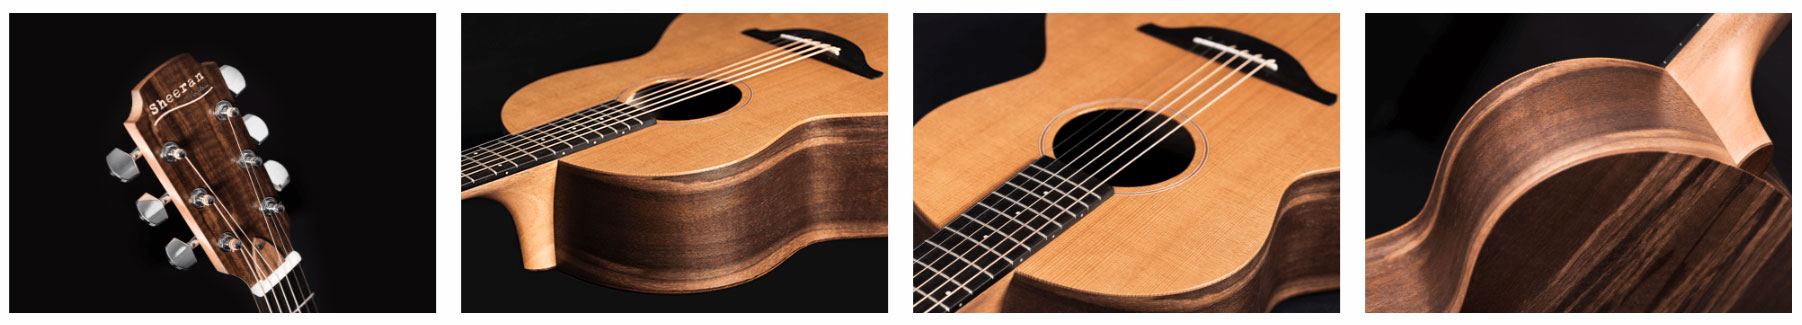 Sheeran By Lowden S01 Orchestra Model Cedre Noyer Eb +housse - Natural Satin - Guitare Acoustique - Variation 2